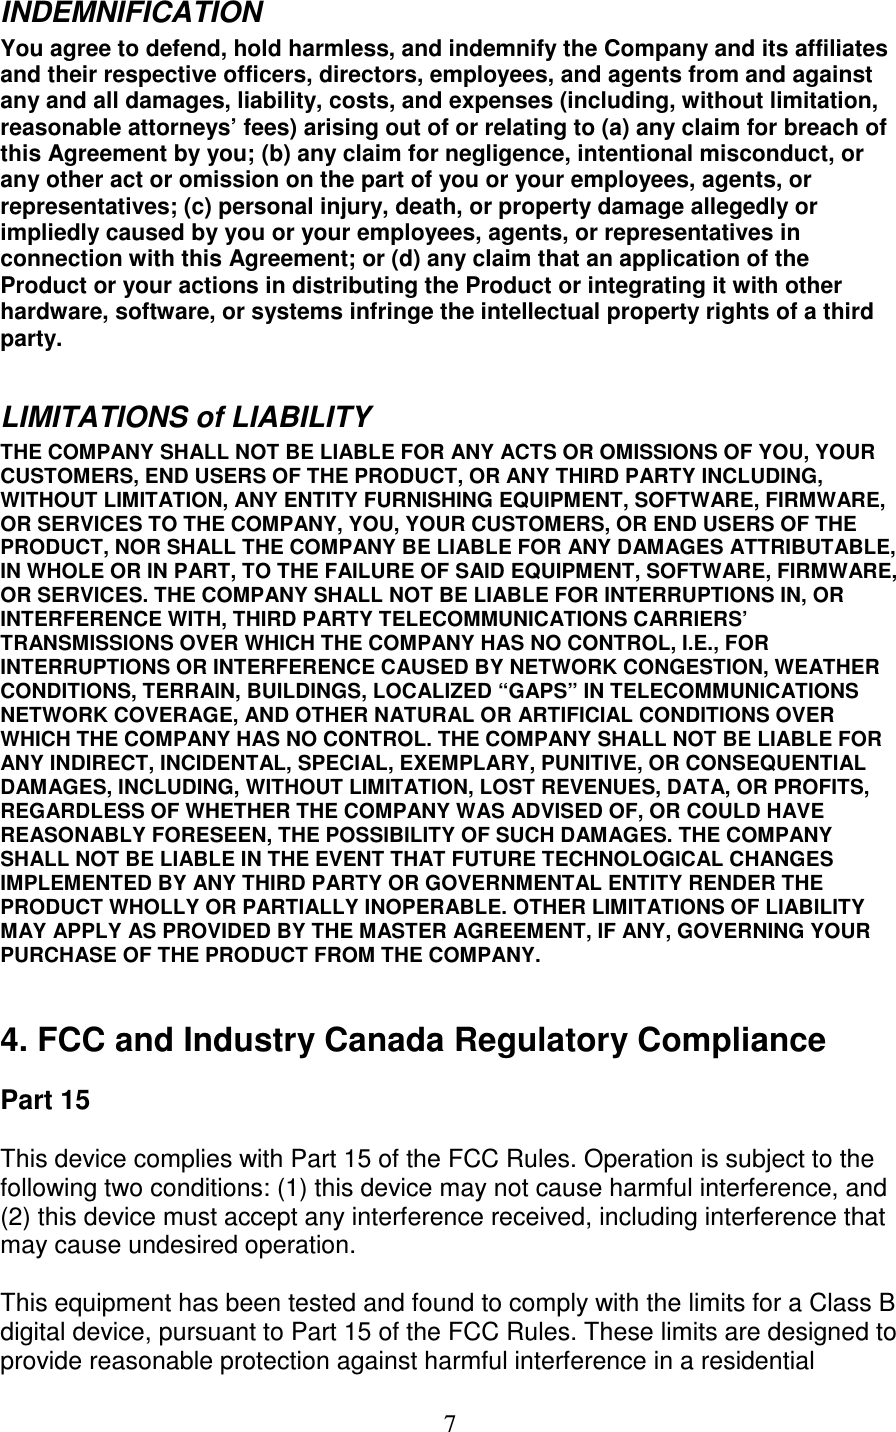   7 INDEMNIFICATION  You agree to defend, hold harmless, and indemnify the Company and its affiliates and their respective officers, directors, employees, and agents from and against any and all damages, liability, costs, and expenses (including, without limitation, reasonable attorneys’ fees) arising out of or relating to (a) any claim for breach of this Agreement by you; (b) any claim for negligence, intentional misconduct, or any other act or omission on the part of you or your employees, agents, or representatives; (c) personal injury, death, or property damage allegedly or impliedly caused by you or your employees, agents, or representatives in connection with this Agreement; or (d) any claim that an application of the Product or your actions in distributing the Product or integrating it with other hardware, software, or systems infringe the intellectual property rights of a third party.   LIMITATIONS of LIABILITY  THE COMPANY SHALL NOT BE LIABLE FOR ANY ACTS OR OMISSIONS OF YOU, YOUR CUSTOMERS, END USERS OF THE PRODUCT, OR ANY THIRD PARTY INCLUDING, WITHOUT LIMITATION, ANY ENTITY FURNISHING EQUIPMENT, SOFTWARE, FIRMWARE, OR SERVICES TO THE COMPANY, YOU, YOUR CUSTOMERS, OR END USERS OF THE PRODUCT, NOR SHALL THE COMPANY BE LIABLE FOR ANY DAMAGES ATTRIBUTABLE, IN WHOLE OR IN PART, TO THE FAILURE OF SAID EQUIPMENT, SOFTWARE, FIRMWARE, OR SERVICES. THE COMPANY SHALL NOT BE LIABLE FOR INTERRUPTIONS IN, OR INTERFERENCE WITH, THIRD PARTY TELECOMMUNICATIONS CARRIERS’ TRANSMISSIONS OVER WHICH THE COMPANY HAS NO CONTROL, I.E., FOR INTERRUPTIONS OR INTERFERENCE CAUSED BY NETWORK CONGESTION, WEATHER CONDITIONS, TERRAIN, BUILDINGS, LOCALIZED “GAPS” IN TELECOMMUNICATIONS NETWORK COVERAGE, AND OTHER NATURAL OR ARTIFICIAL CONDITIONS OVER WHICH THE COMPANY HAS NO CONTROL. THE COMPANY SHALL NOT BE LIABLE FOR ANY INDIRECT, INCIDENTAL, SPECIAL, EXEMPLARY, PUNITIVE, OR CONSEQUENTIAL DAMAGES, INCLUDING, WITHOUT LIMITATION, LOST REVENUES, DATA, OR PROFITS, REGARDLESS OF WHETHER THE COMPANY WAS ADVISED OF, OR COULD HAVE REASONABLY FORESEEN, THE POSSIBILITY OF SUCH DAMAGES. THE COMPANY SHALL NOT BE LIABLE IN THE EVENT THAT FUTURE TECHNOLOGICAL CHANGES IMPLEMENTED BY ANY THIRD PARTY OR GOVERNMENTAL ENTITY RENDER THE PRODUCT WHOLLY OR PARTIALLY INOPERABLE. OTHER LIMITATIONS OF LIABILITY MAY APPLY AS PROVIDED BY THE MASTER AGREEMENT, IF ANY, GOVERNING YOUR PURCHASE OF THE PRODUCT FROM THE COMPANY.  4. FCC and Industry Canada Regulatory Compliance Part 15 This device complies with Part 15 of the FCC Rules. Operation is subject to the following two conditions: (1) this device may not cause harmful interference, and (2) this device must accept any interference received, including interference that may cause undesired operation. This equipment has been tested and found to comply with the limits for a Class B digital device, pursuant to Part 15 of the FCC Rules. These limits are designed to provide reasonable protection against harmful interference in a residential 